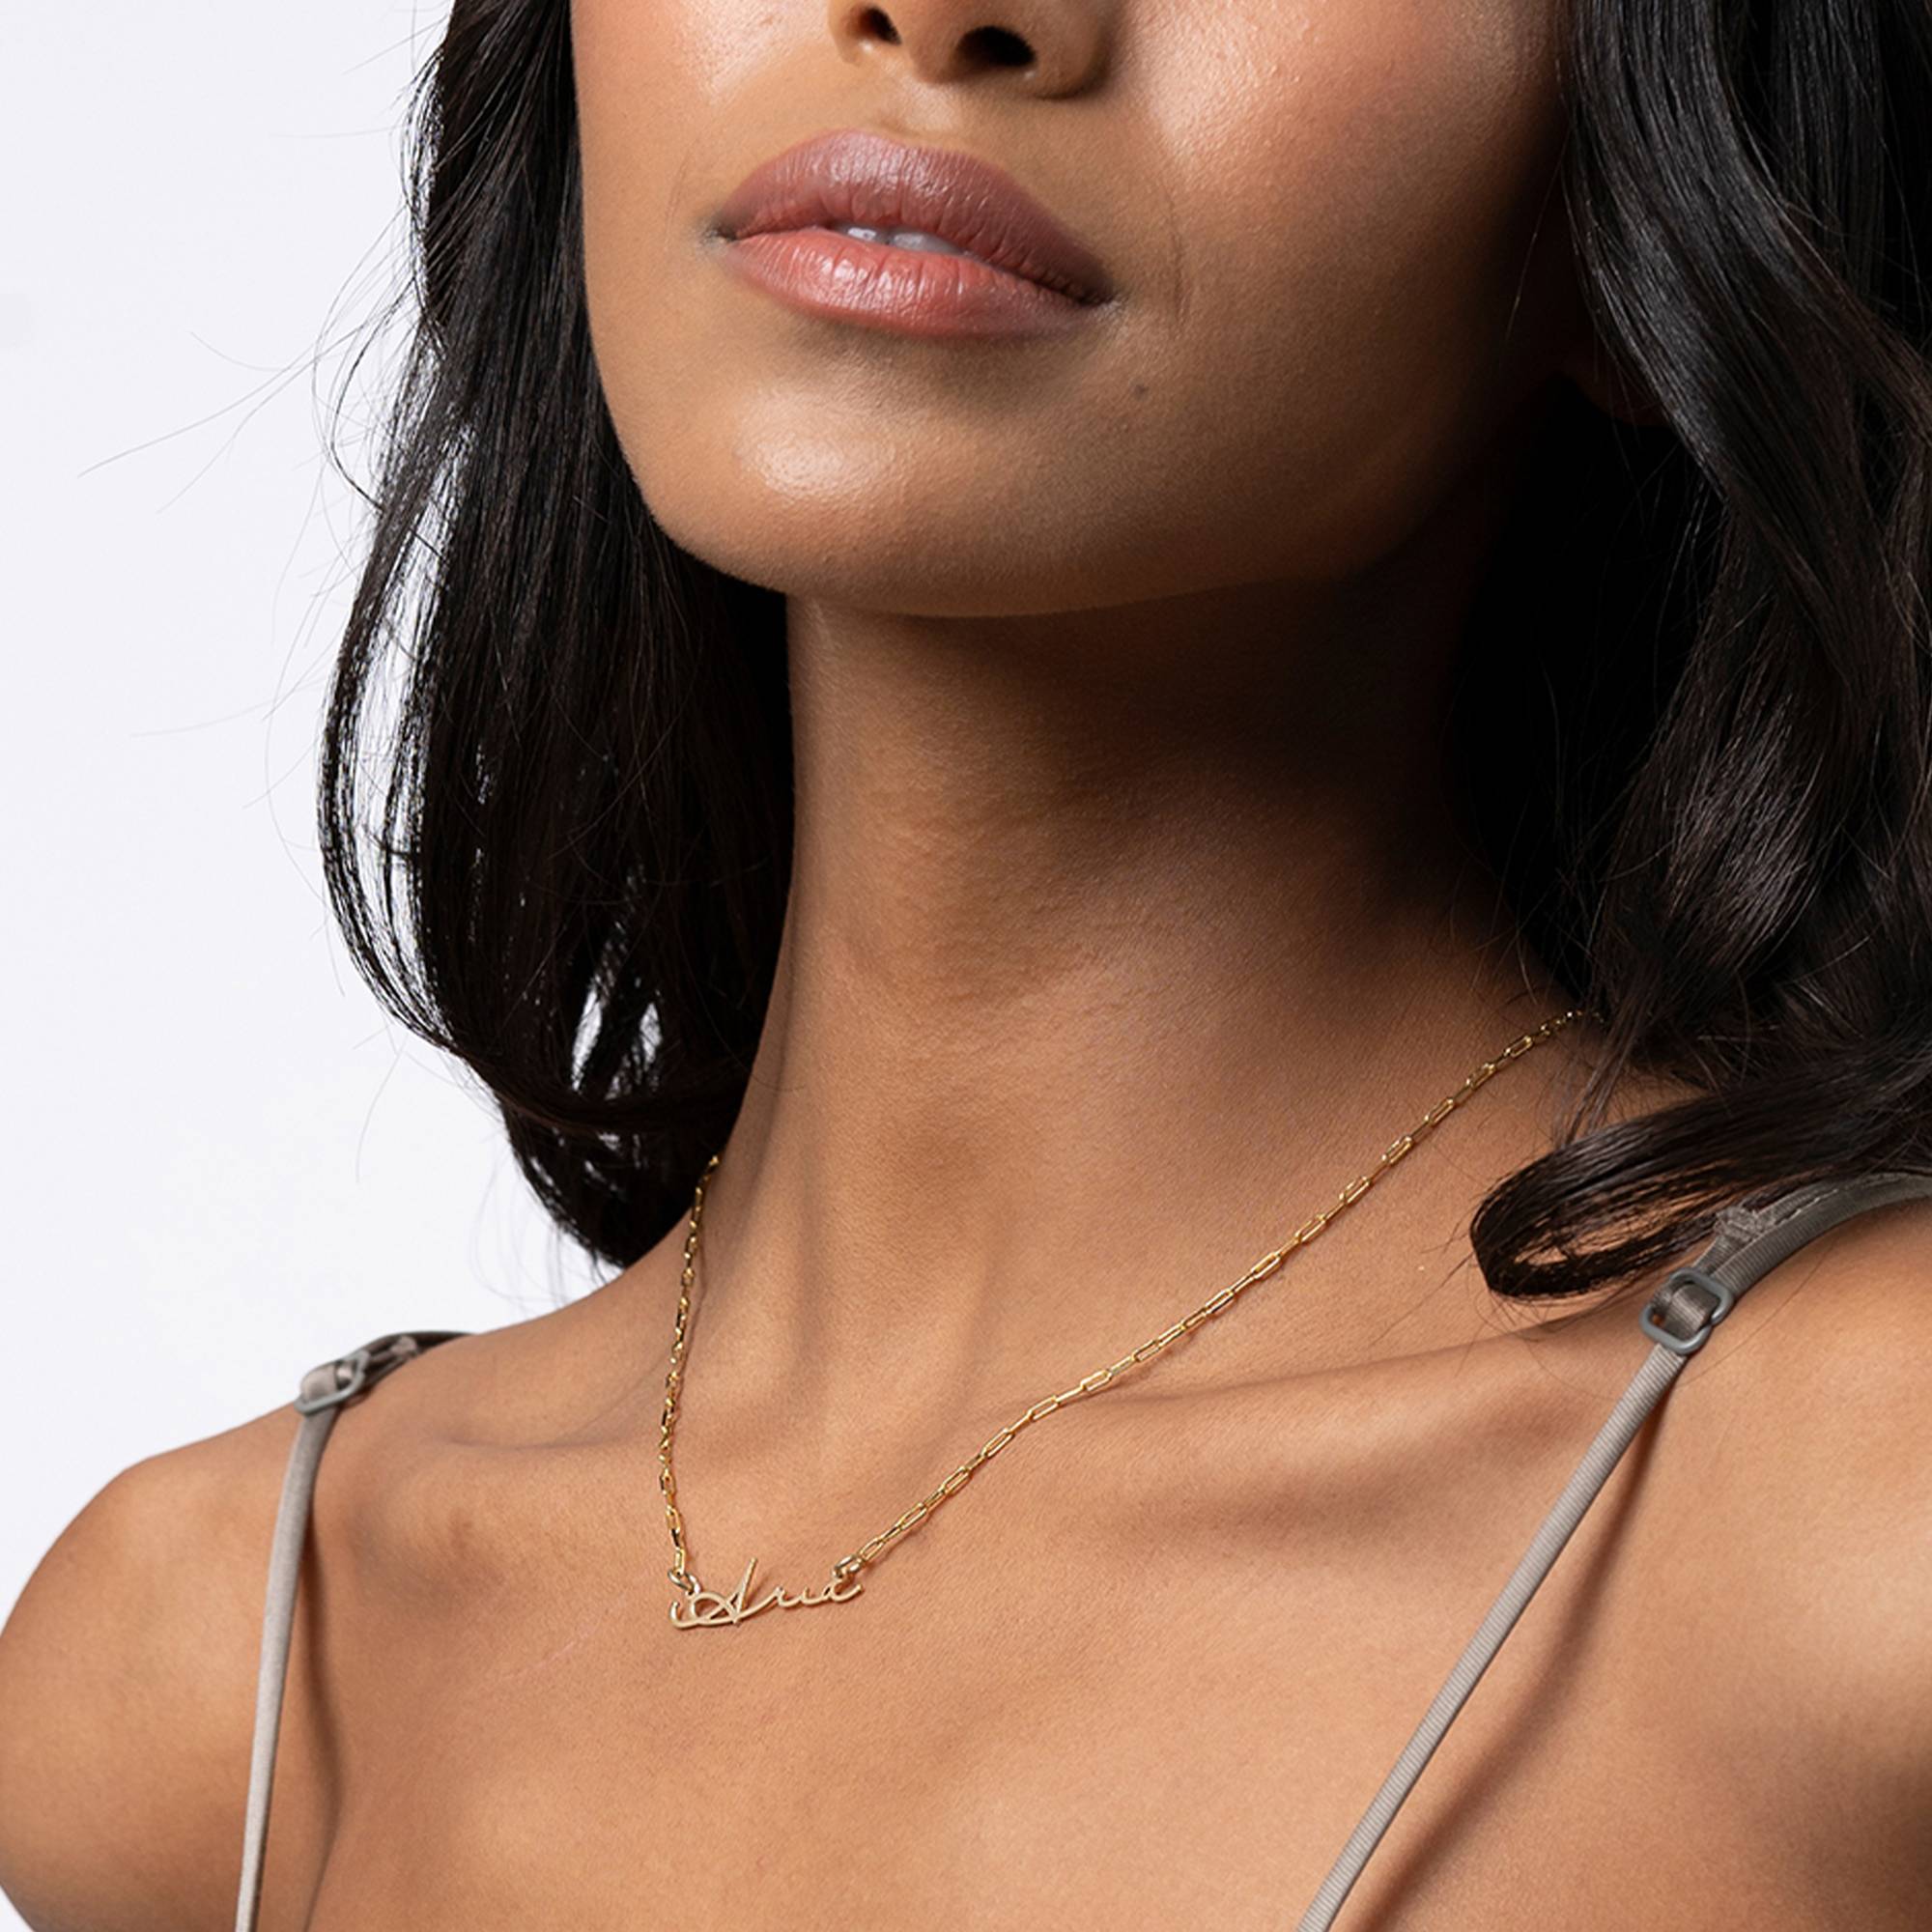 Signature Link Chain Name Necklace in 14K Yellow Gold-1 product photo